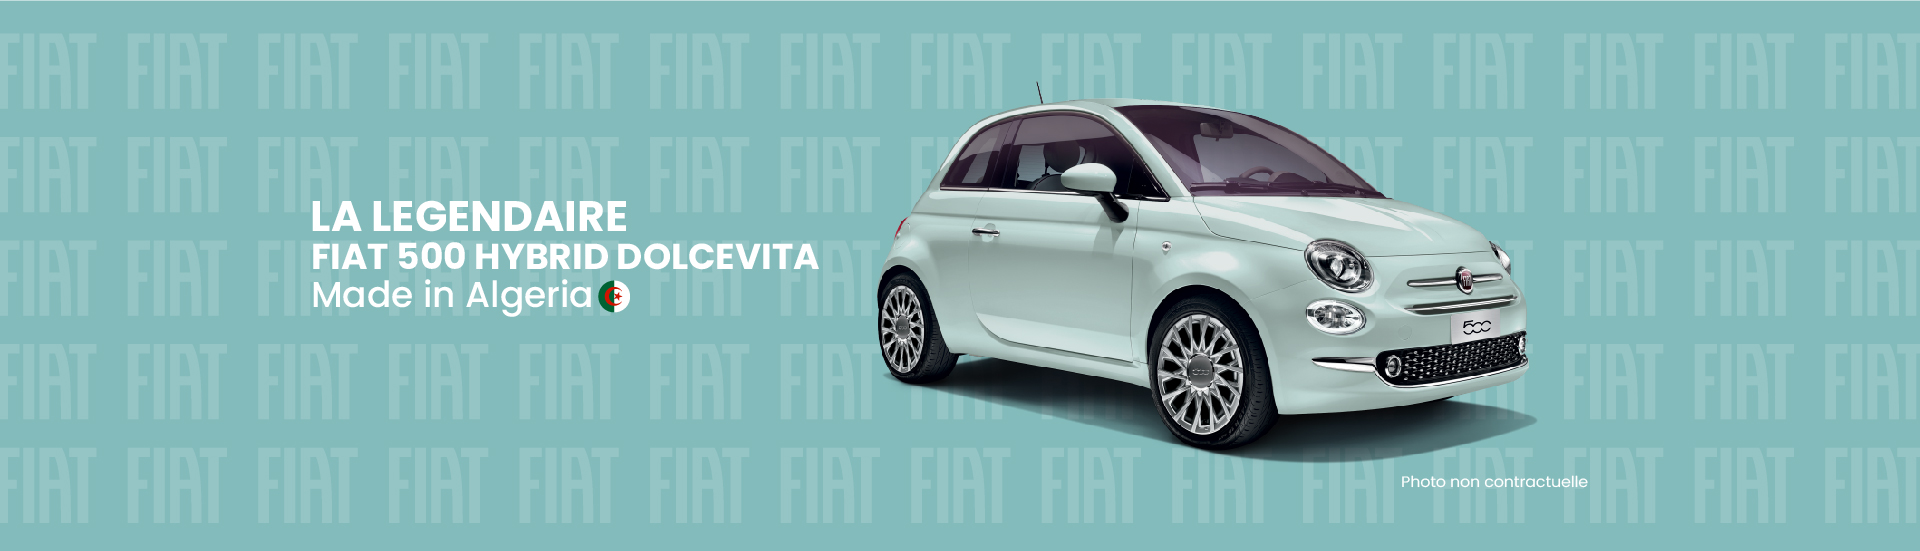 NEW 500 AND 500C DOLCEVITA SPECIAL EDITION